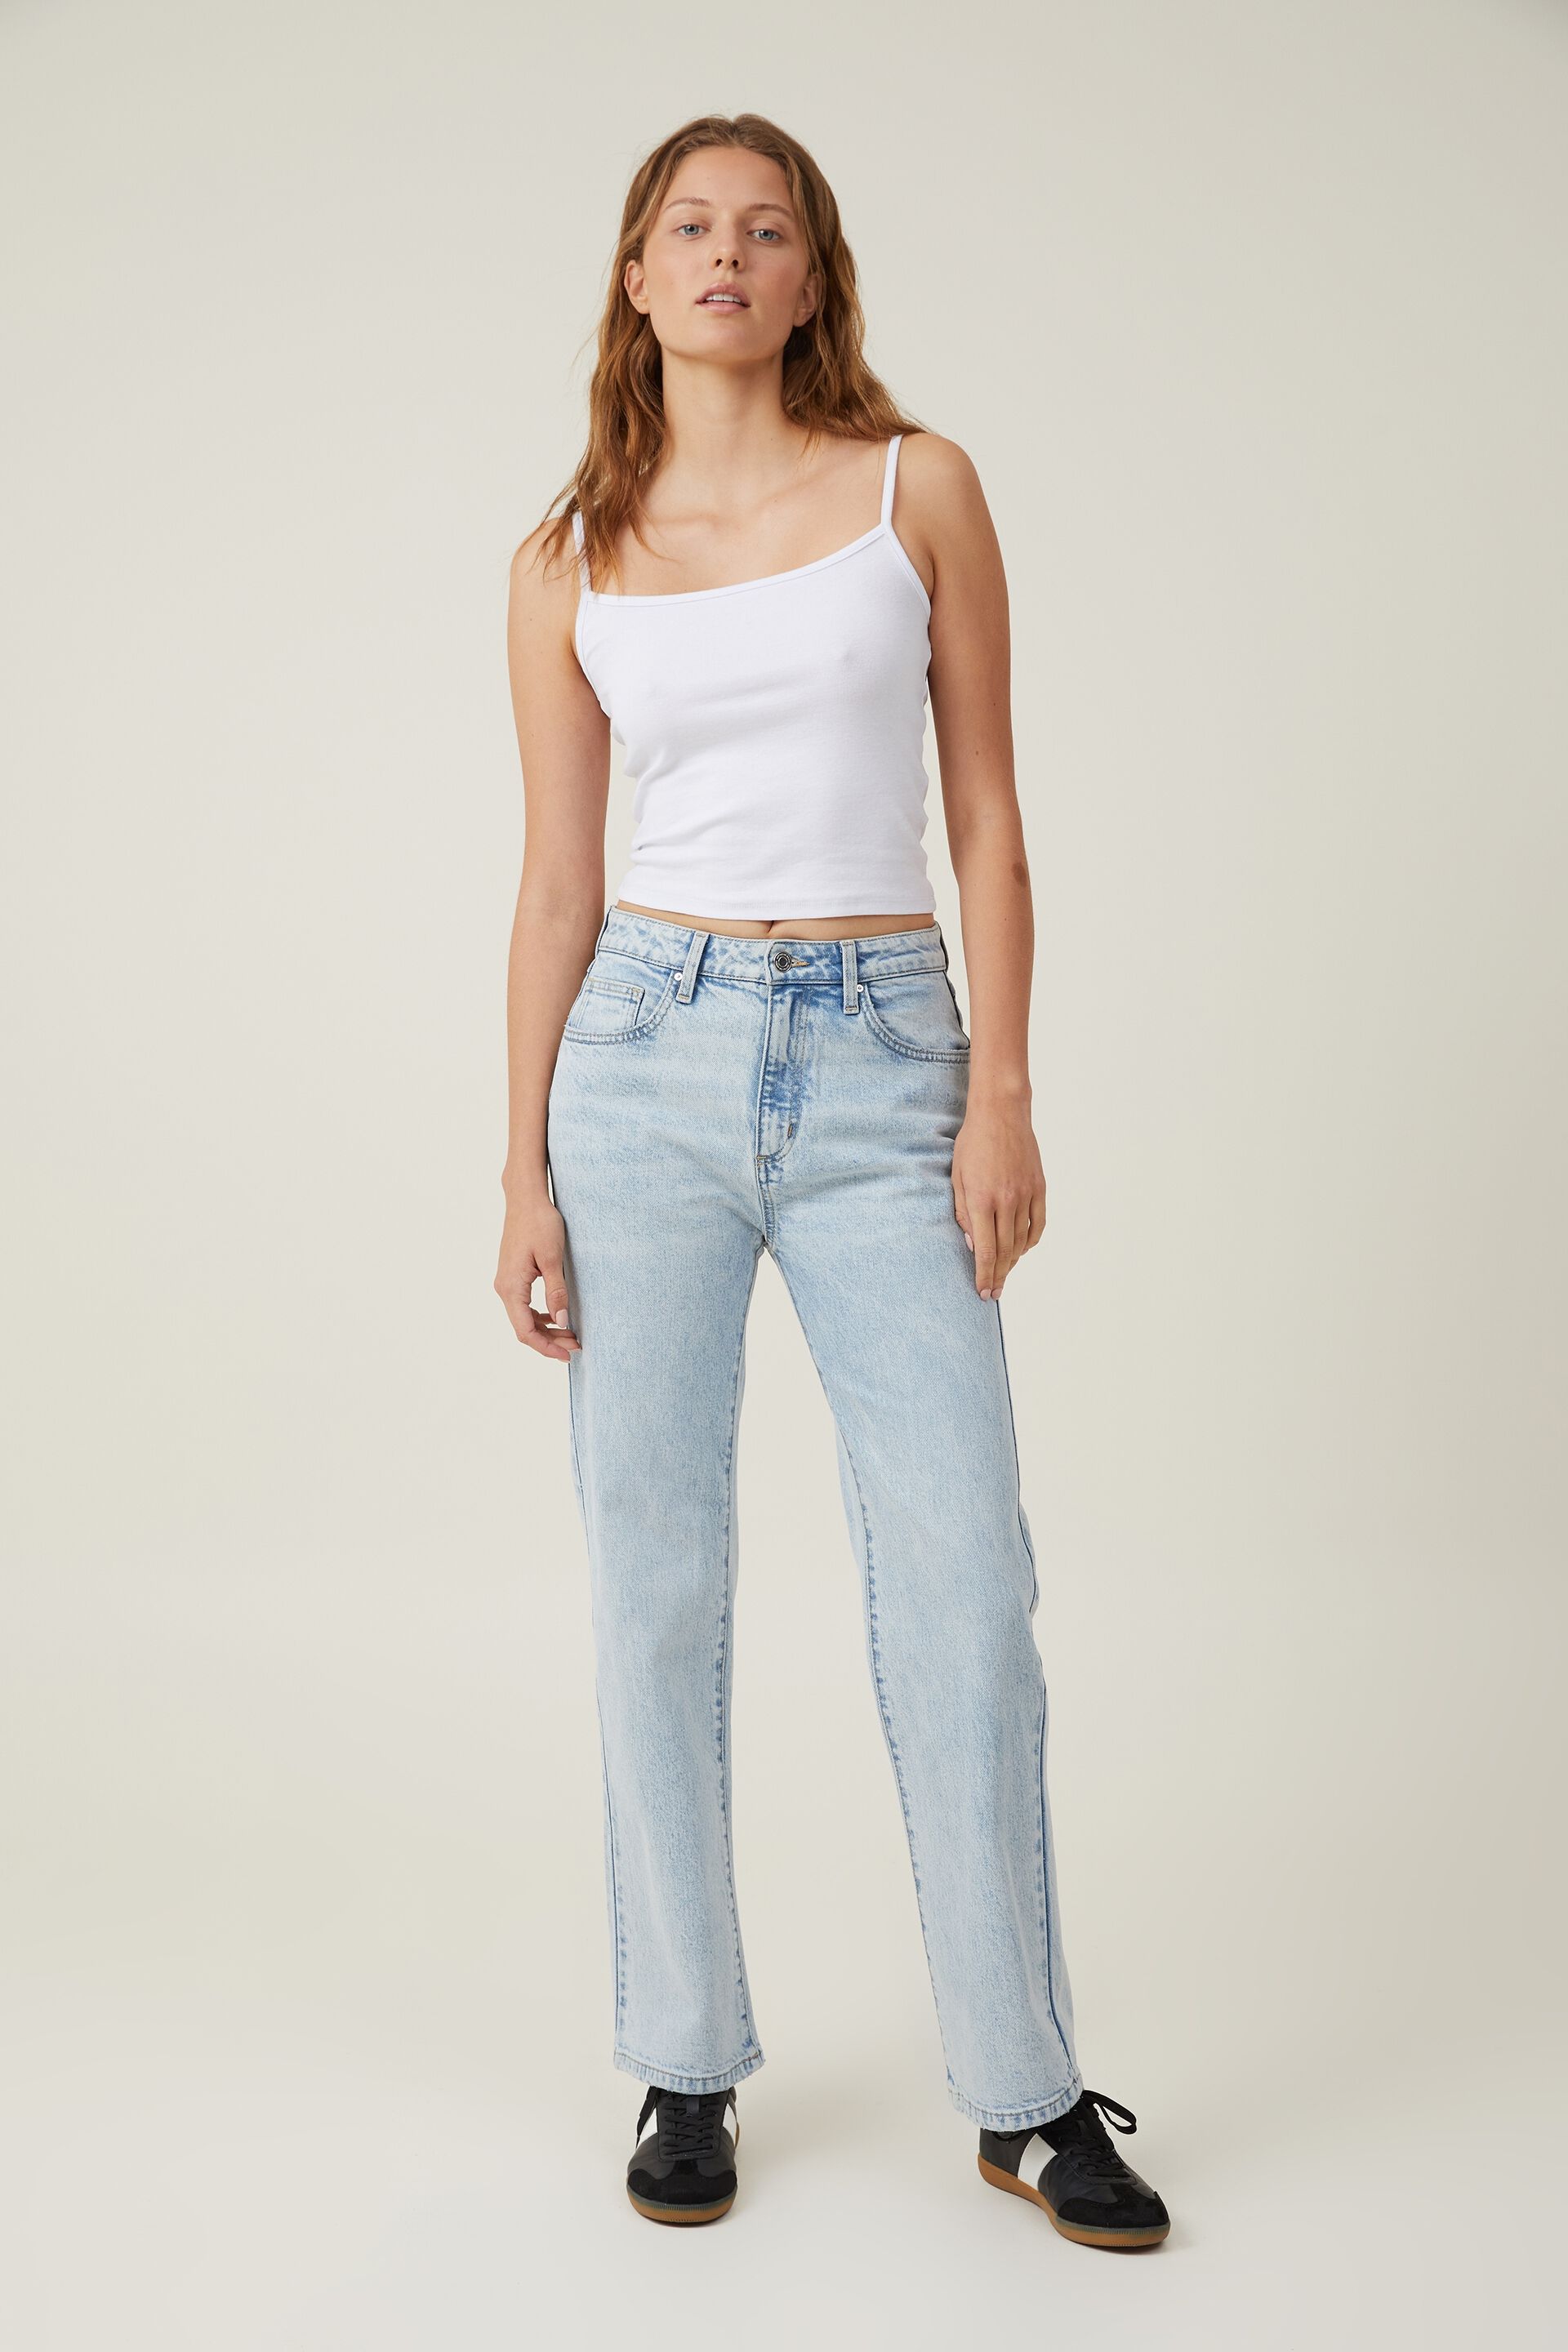 315 Shaping Bootcut Women's Jeans - Dark Wash | Levi's® US | Women jeans,  Levi, Washed denim jeans